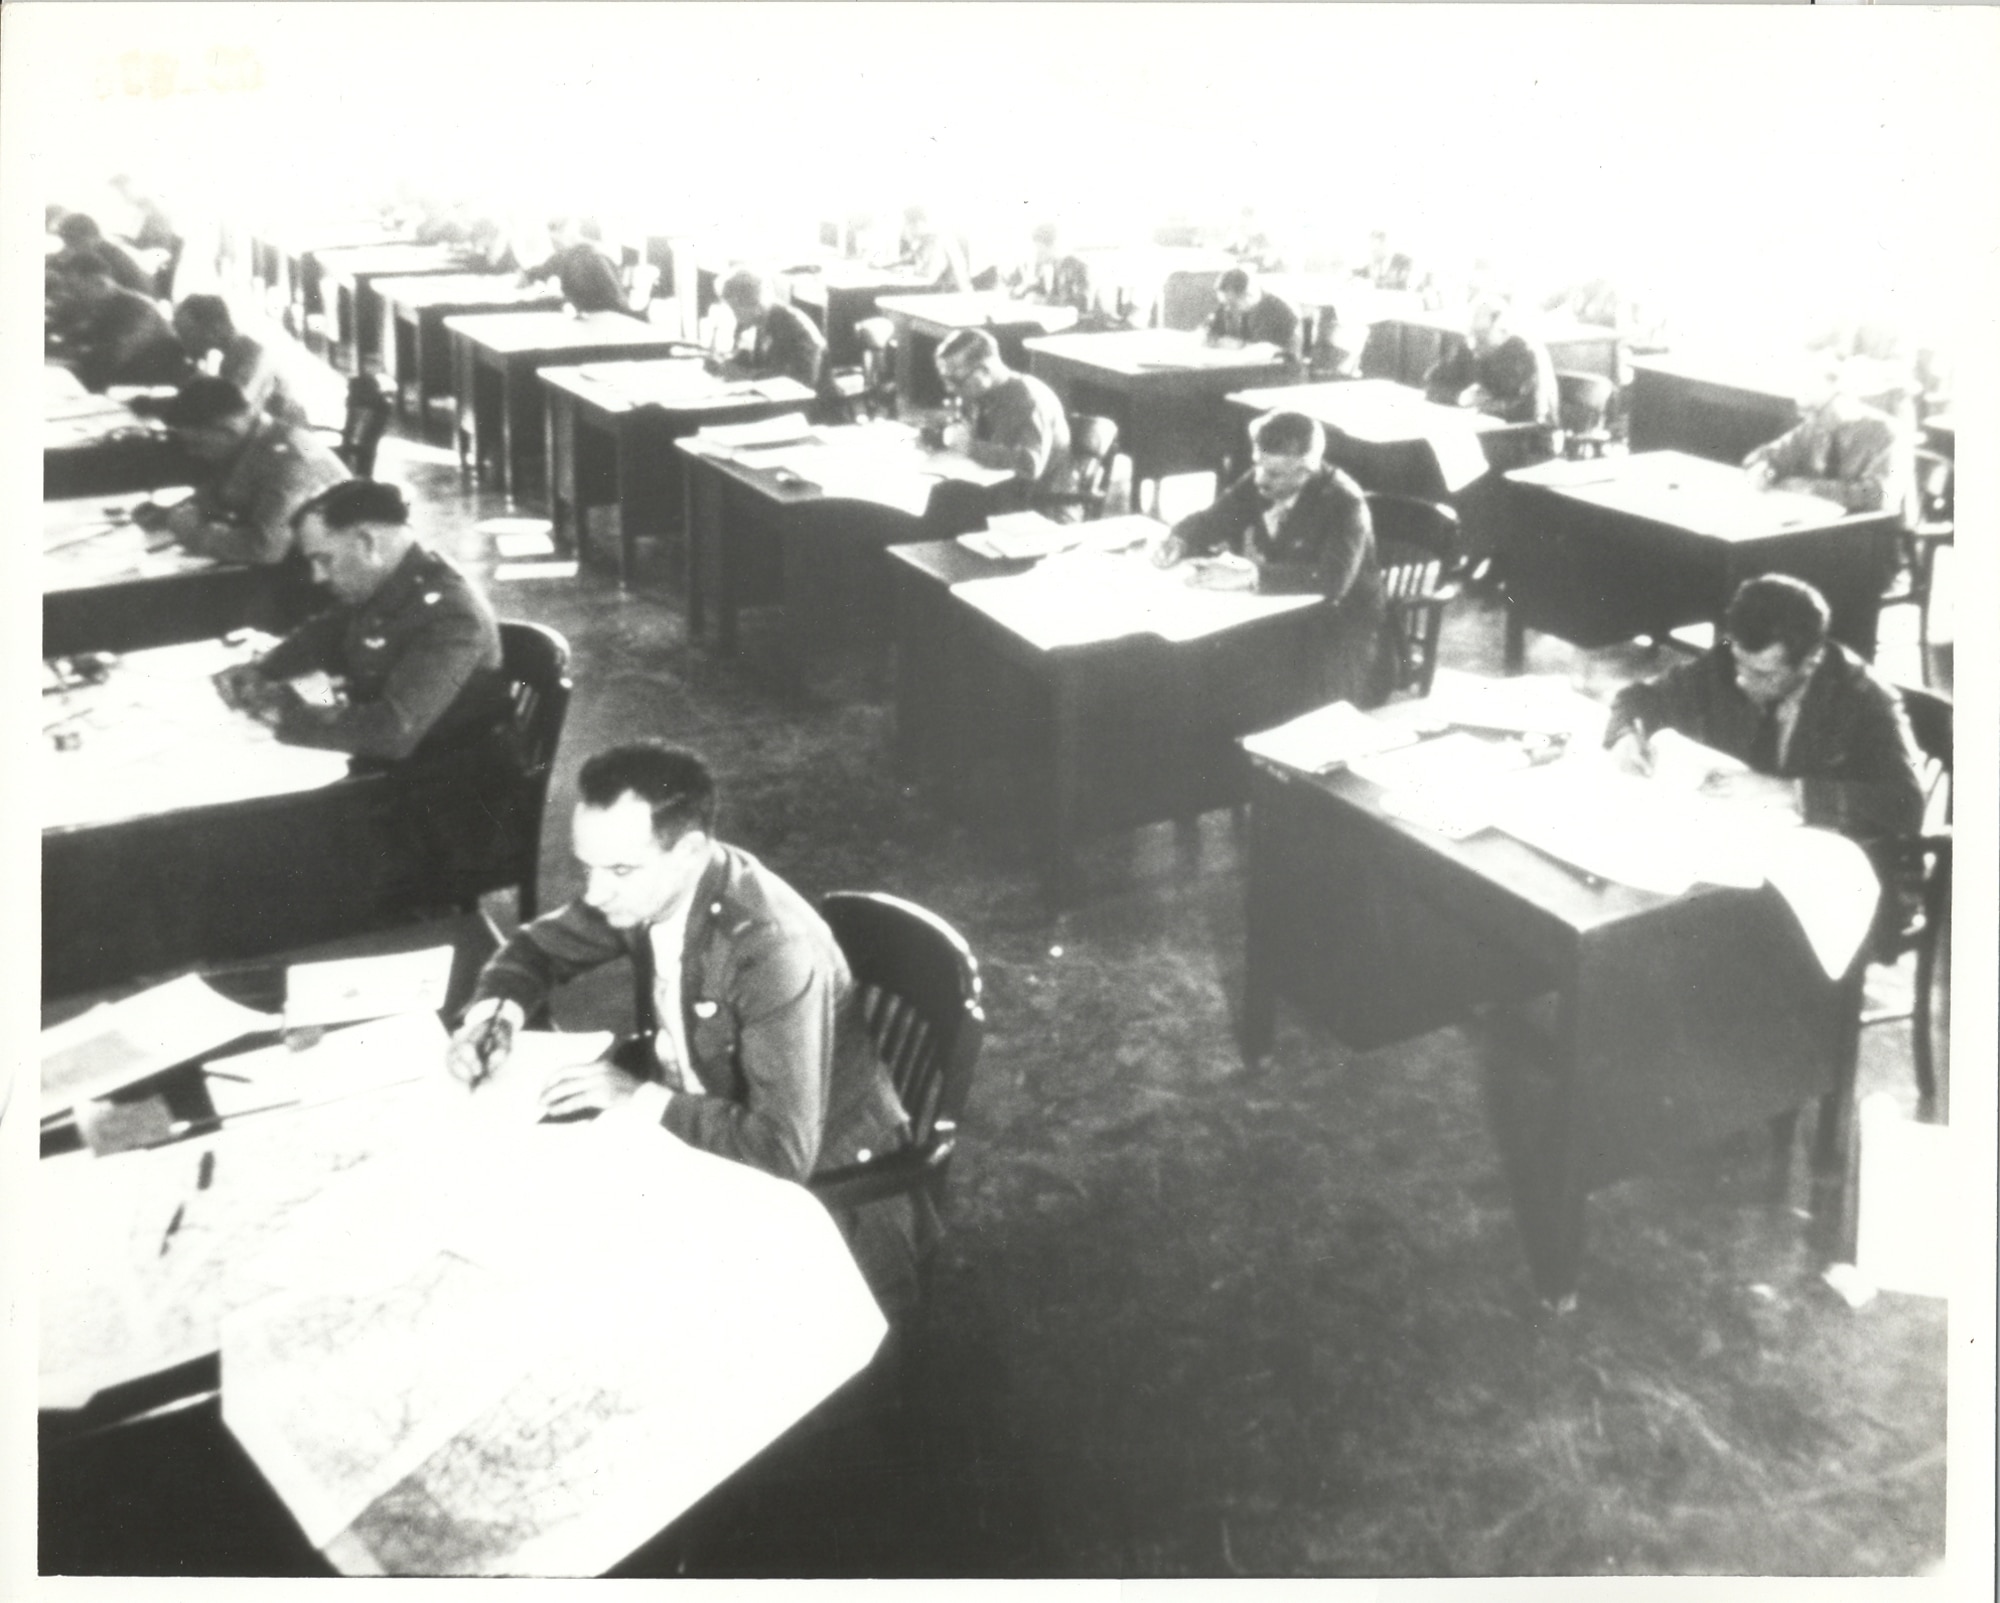 In this historical image, officers take part in a map reading exercise in the 1930s at the Air Corps Tactical School, Maxwell Field, Alabama. The school moved from Langley Field, Virginia, to Maxwell Field in 1931. With its first class starting on Nov. 1, 1920, at Langley Field, it was first called the Air Service Field Officers School then Air Service Tactical School before being renamed Air Corps Tactical School in 1926, five years before its move to Maxwell. (Courtesy photo)